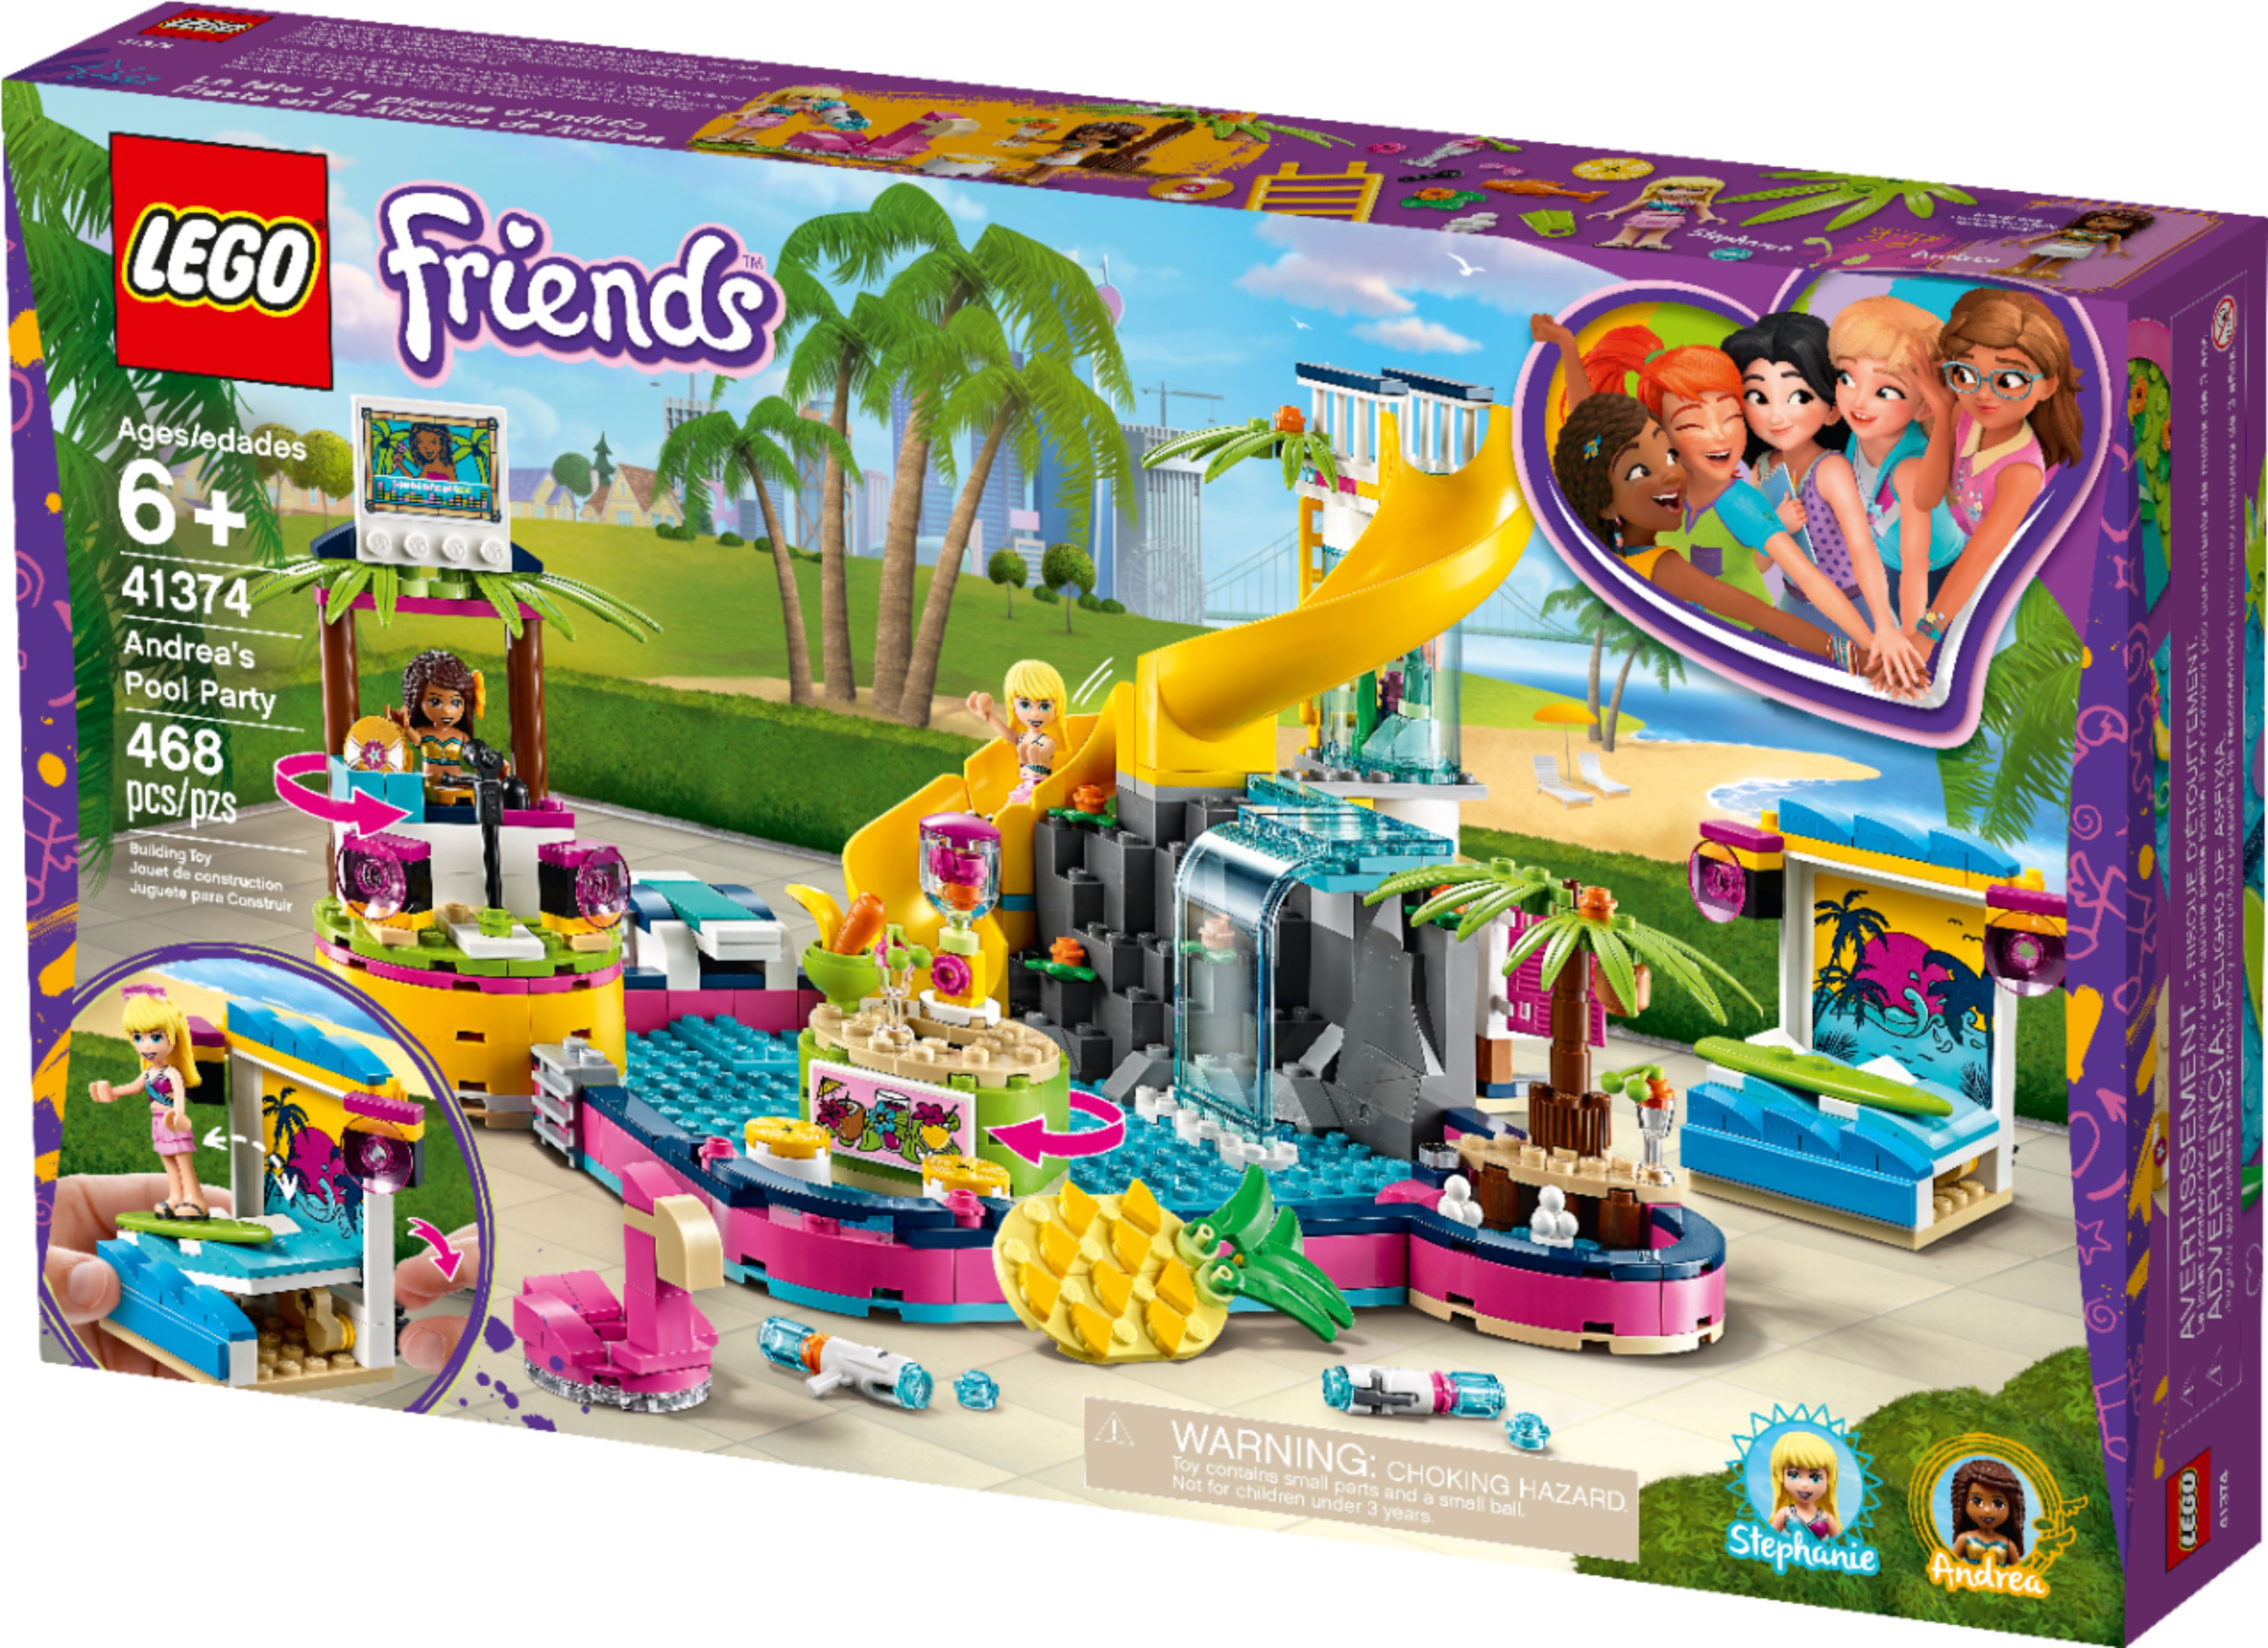 Andrea's Pool Party LEGO Friends 41374 for sale online